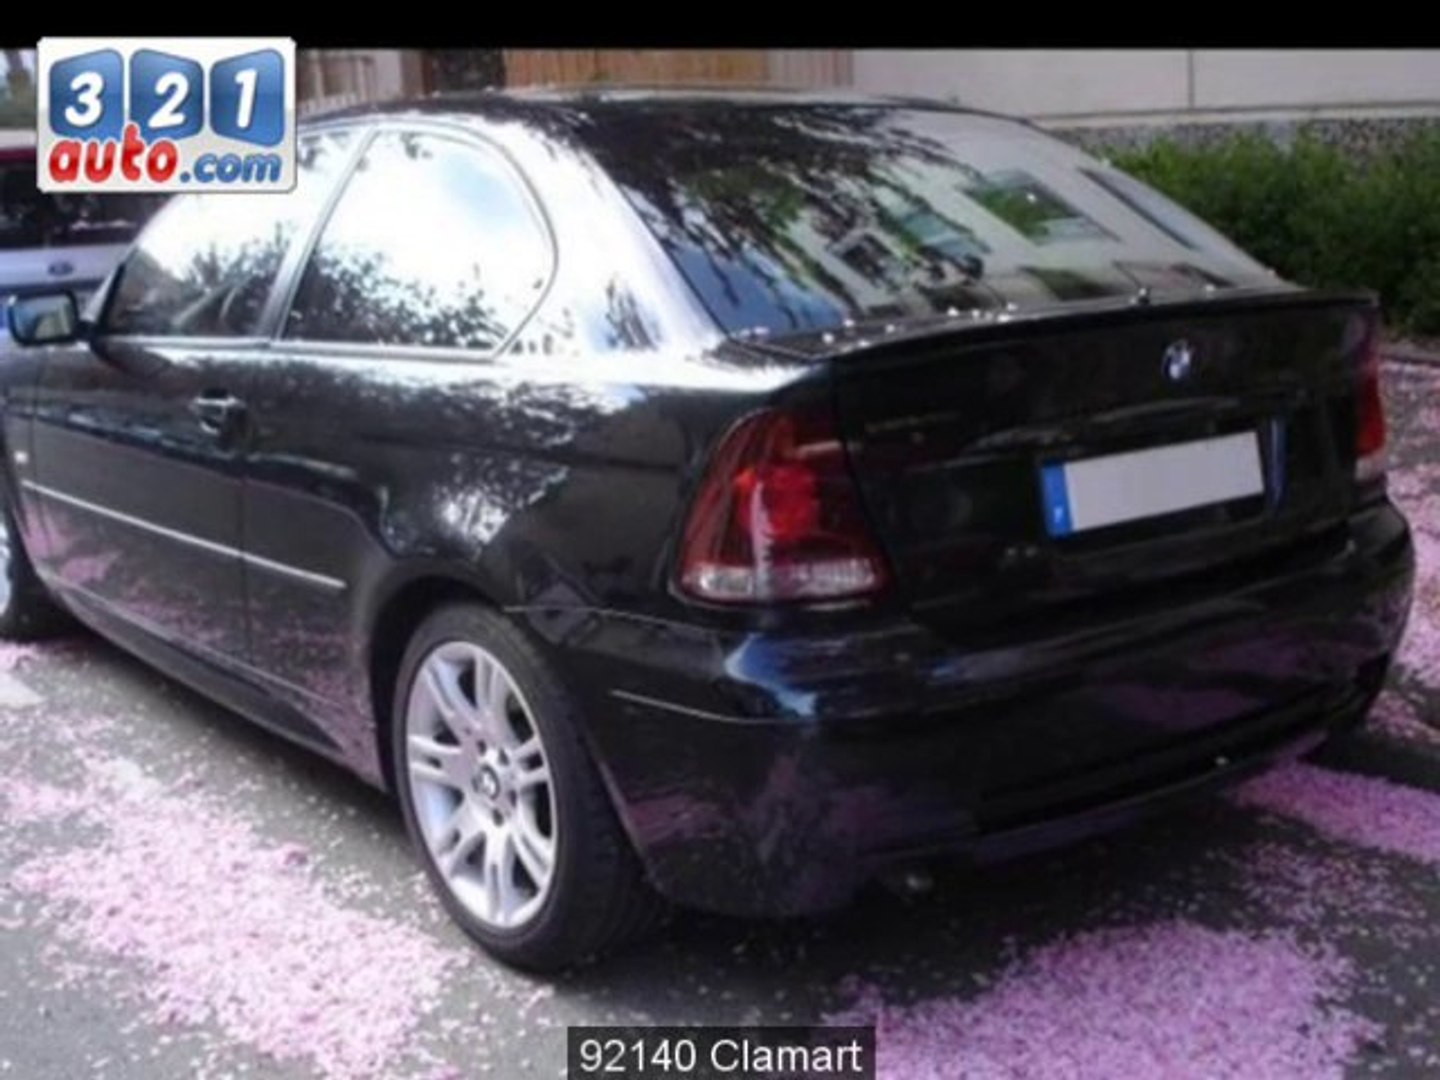 Occasion BMW PACK M 320TD COMPACT 2003 163000 kms Clamart - Vidéo  Dailymotion